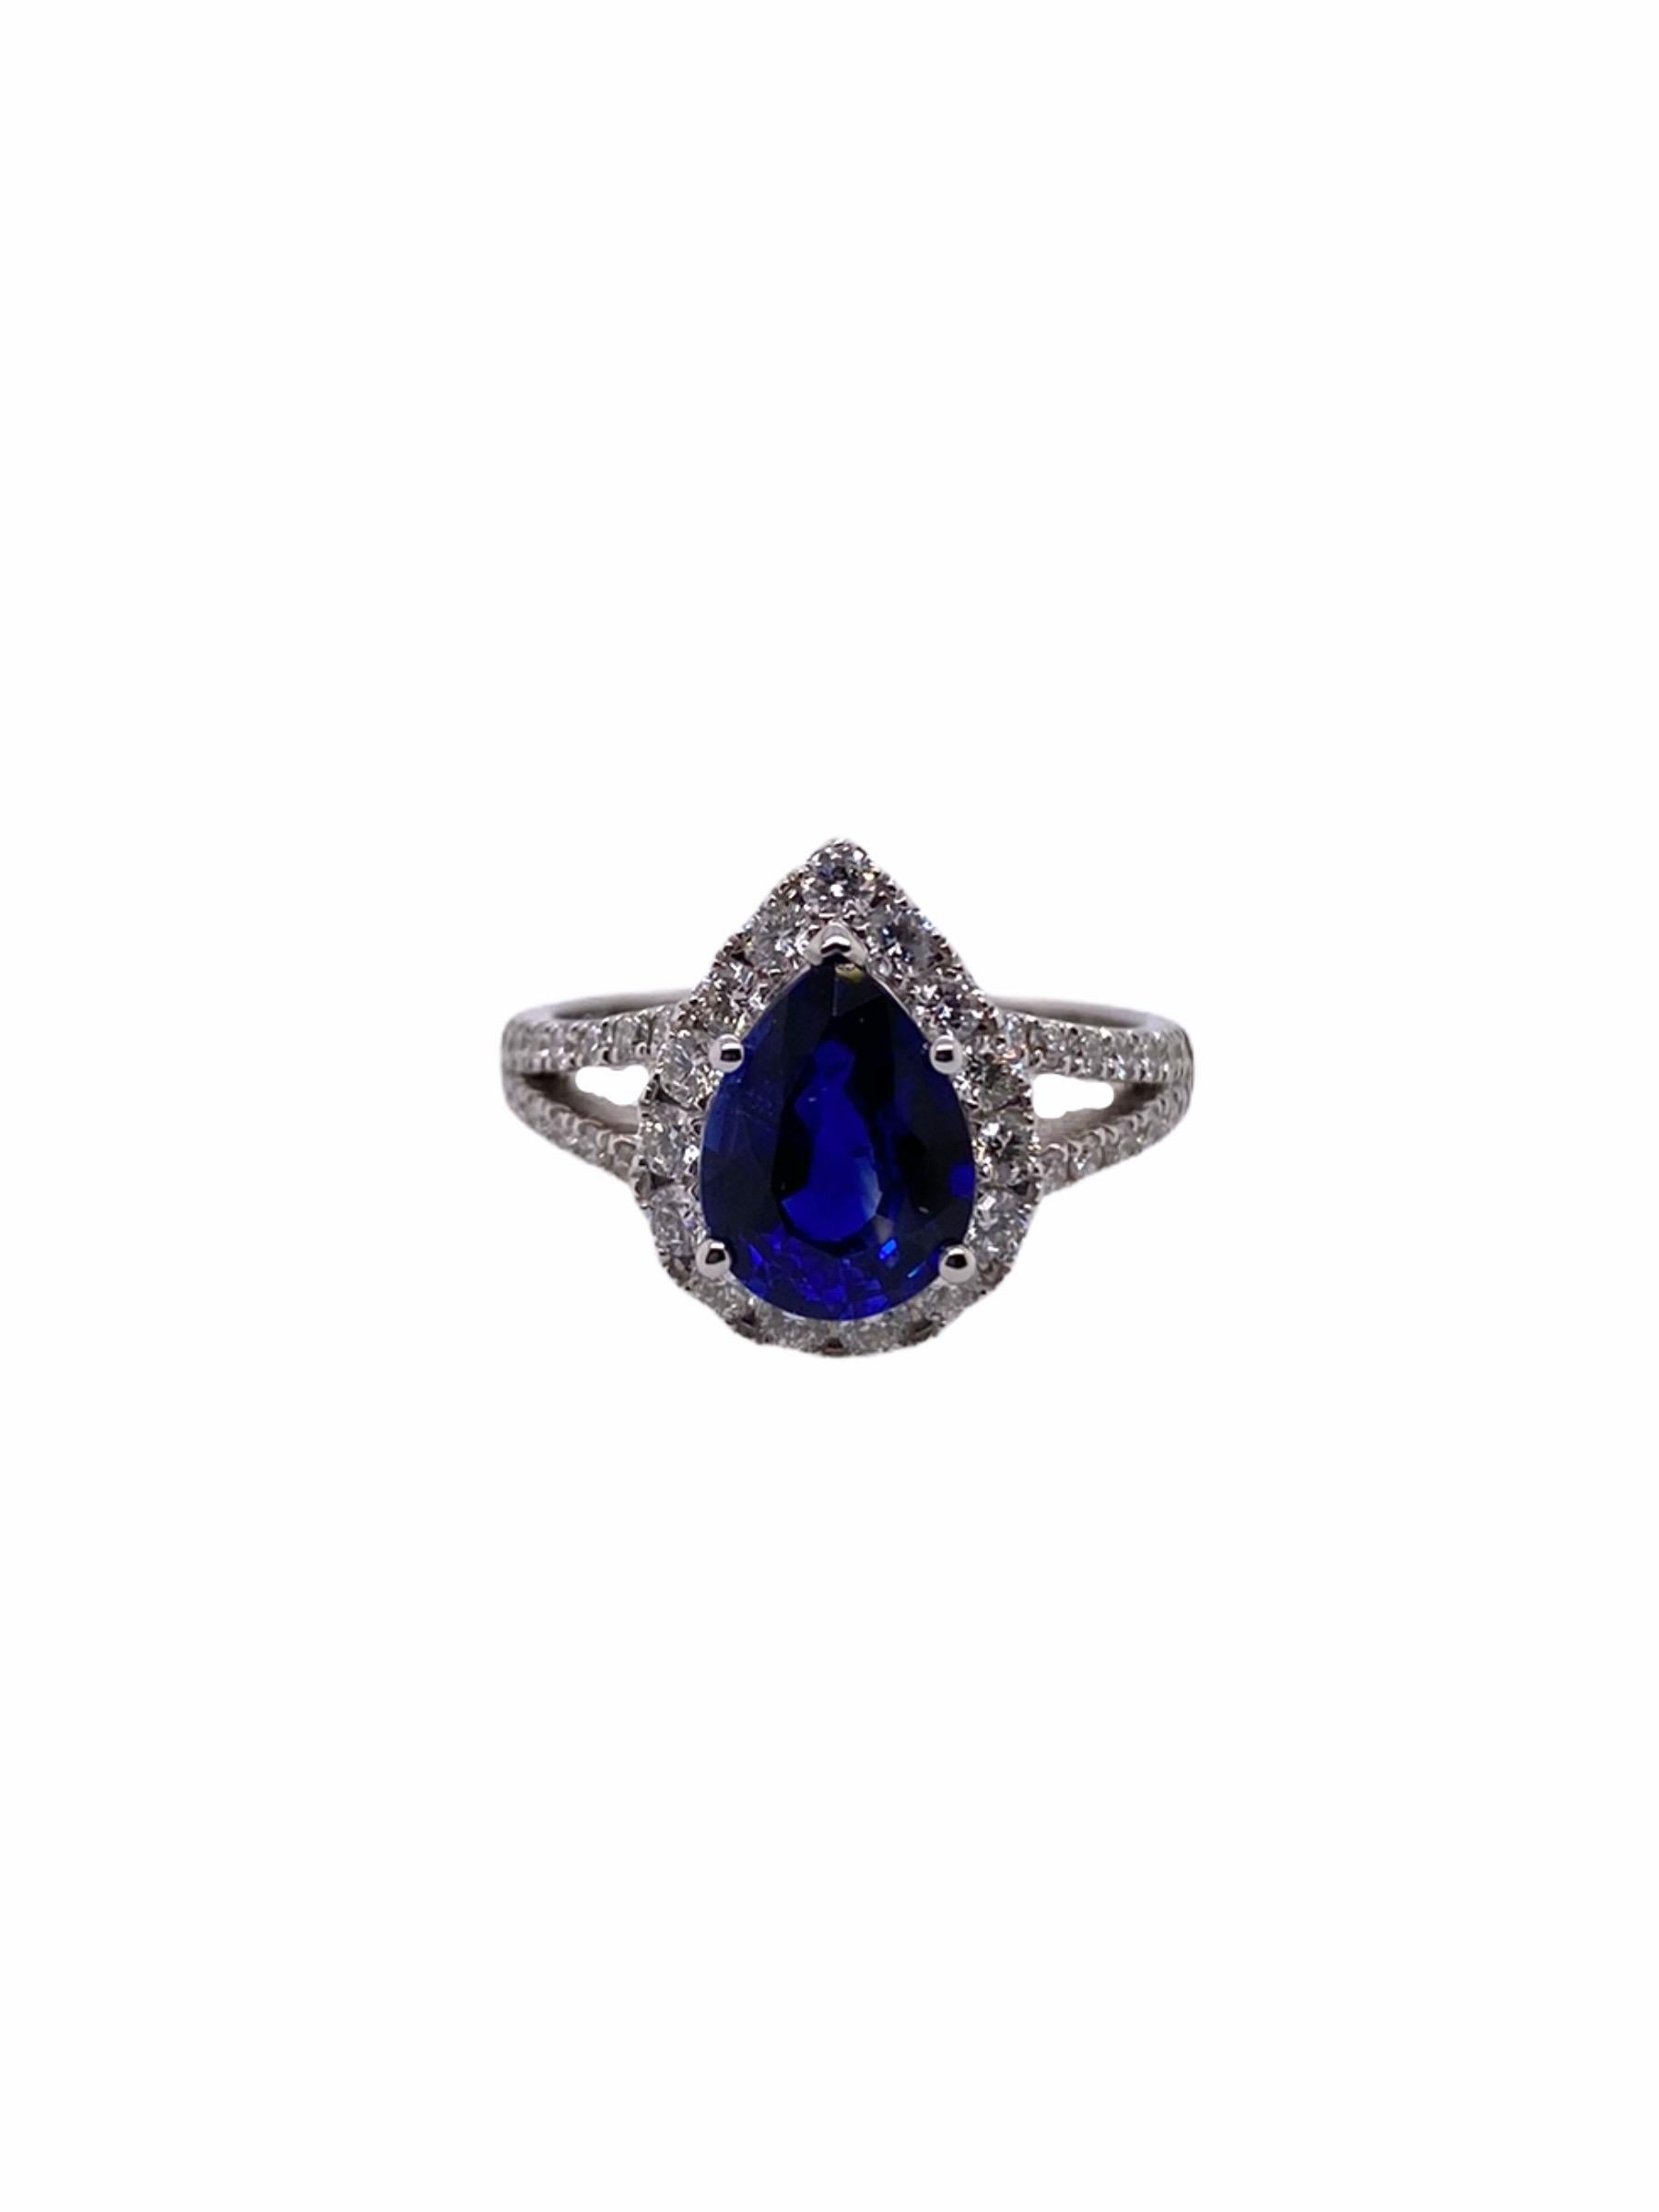 In this article, PARIS Craft House presents a classic Sapphire Ring. Featured on this piece is a 1.90ct royal blue Pear-cut Sapphire in elevated prong setting, an elevated setting increases the visibility of the center piece under the light. This